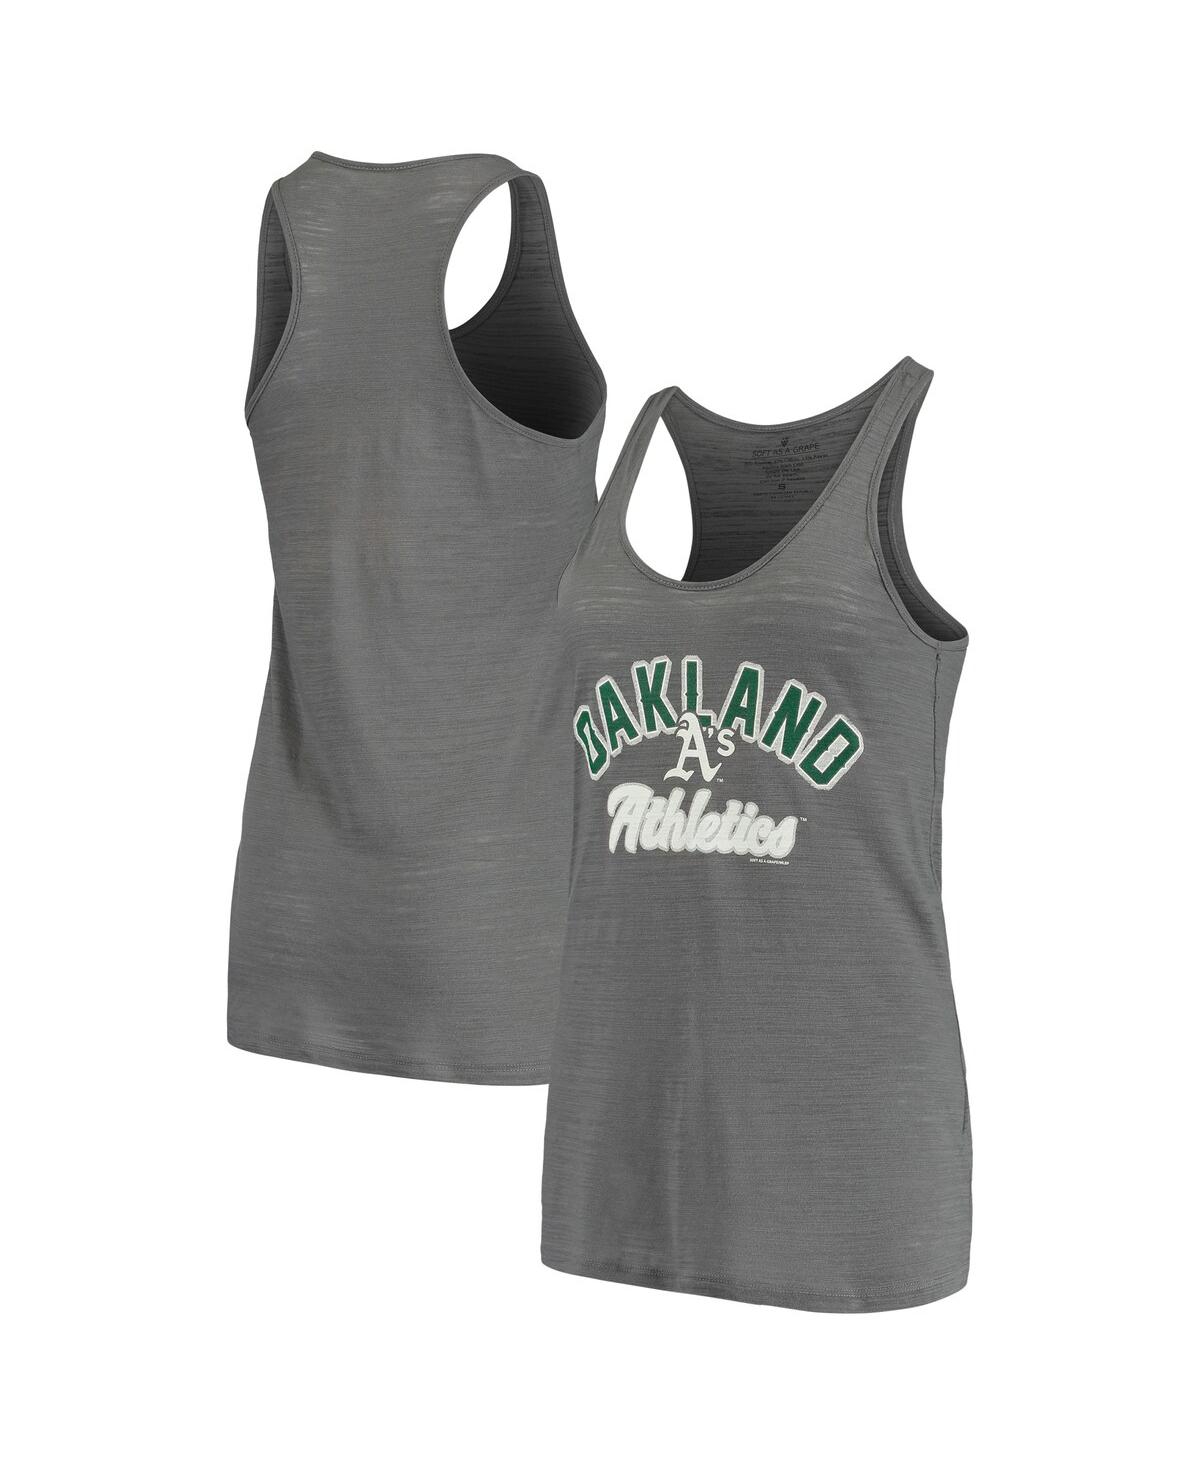 Women's Soft As A Grape Charcoal Oakland Athletics Multi-Count Tank Top - Charcoal